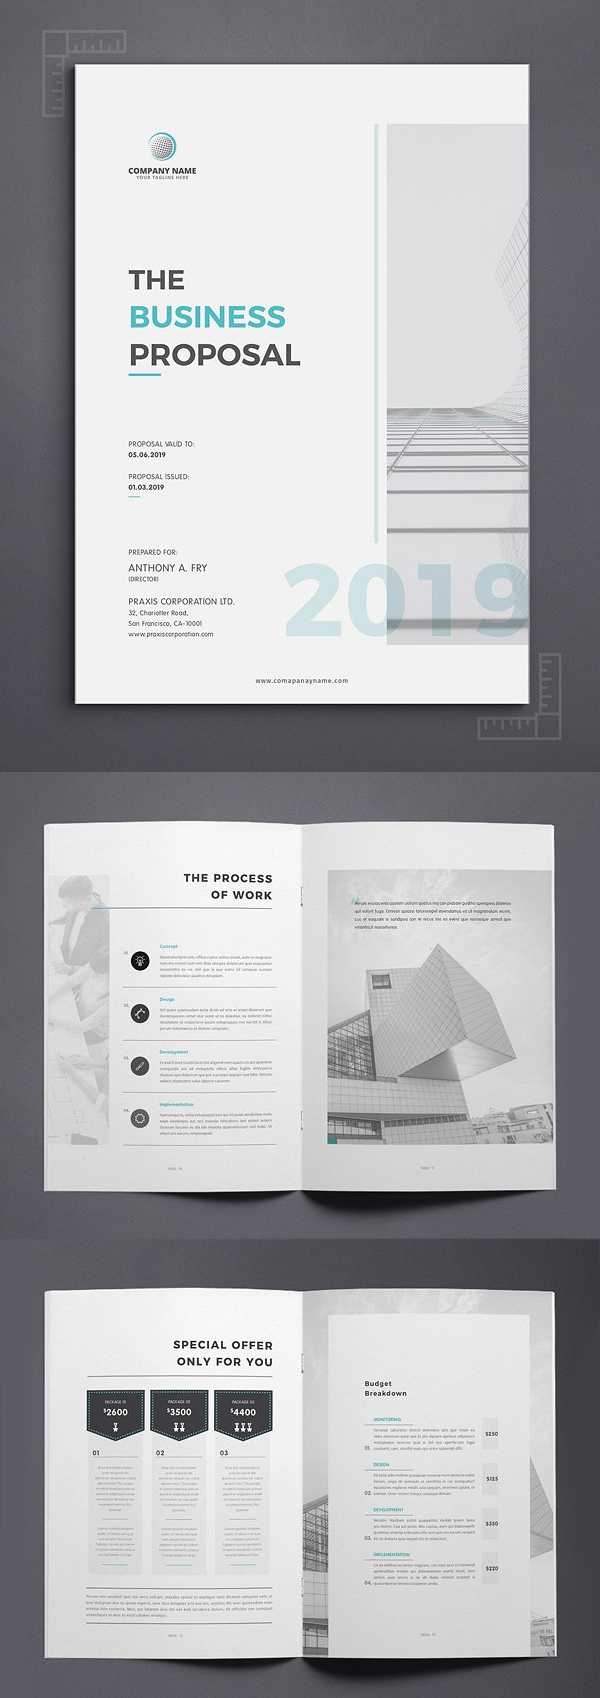 Business Proposal Templates | Design | Graphic Design Junction Throughout Free Business Proposal Template Ms Word